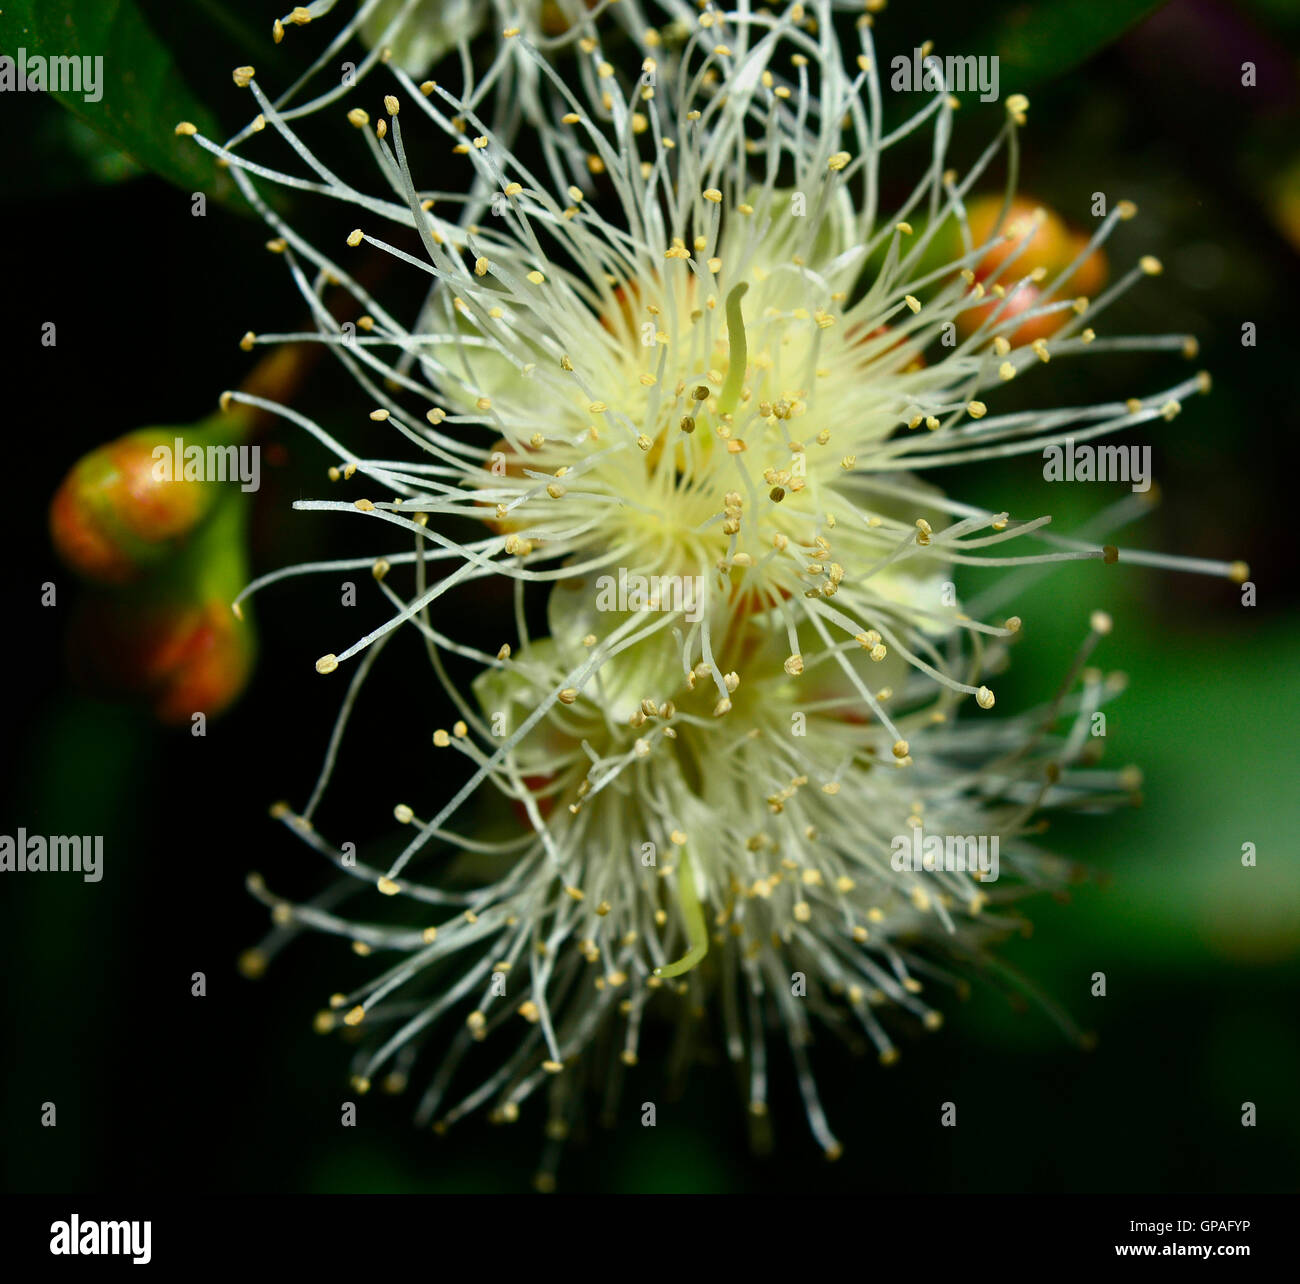 Brush cherry blossom Syzygium australe. An explosion of yellow and gold pollen when the Brush cherry bud opens into a flower Stock Photo